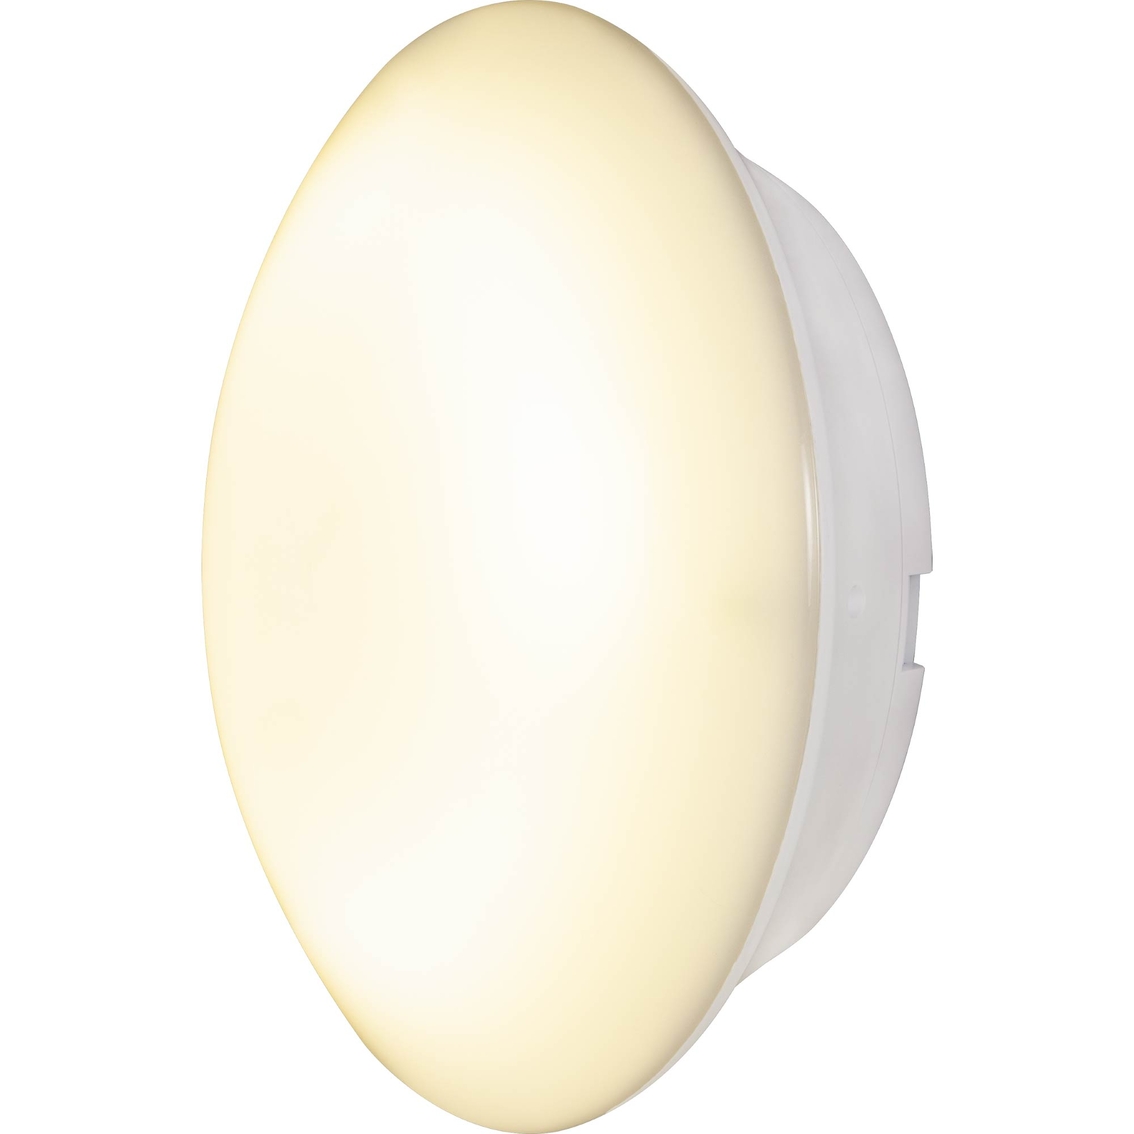 Energizer Battery Operated 300ml LED Ceiling Fixture with Wall Switch - Image 2 of 8